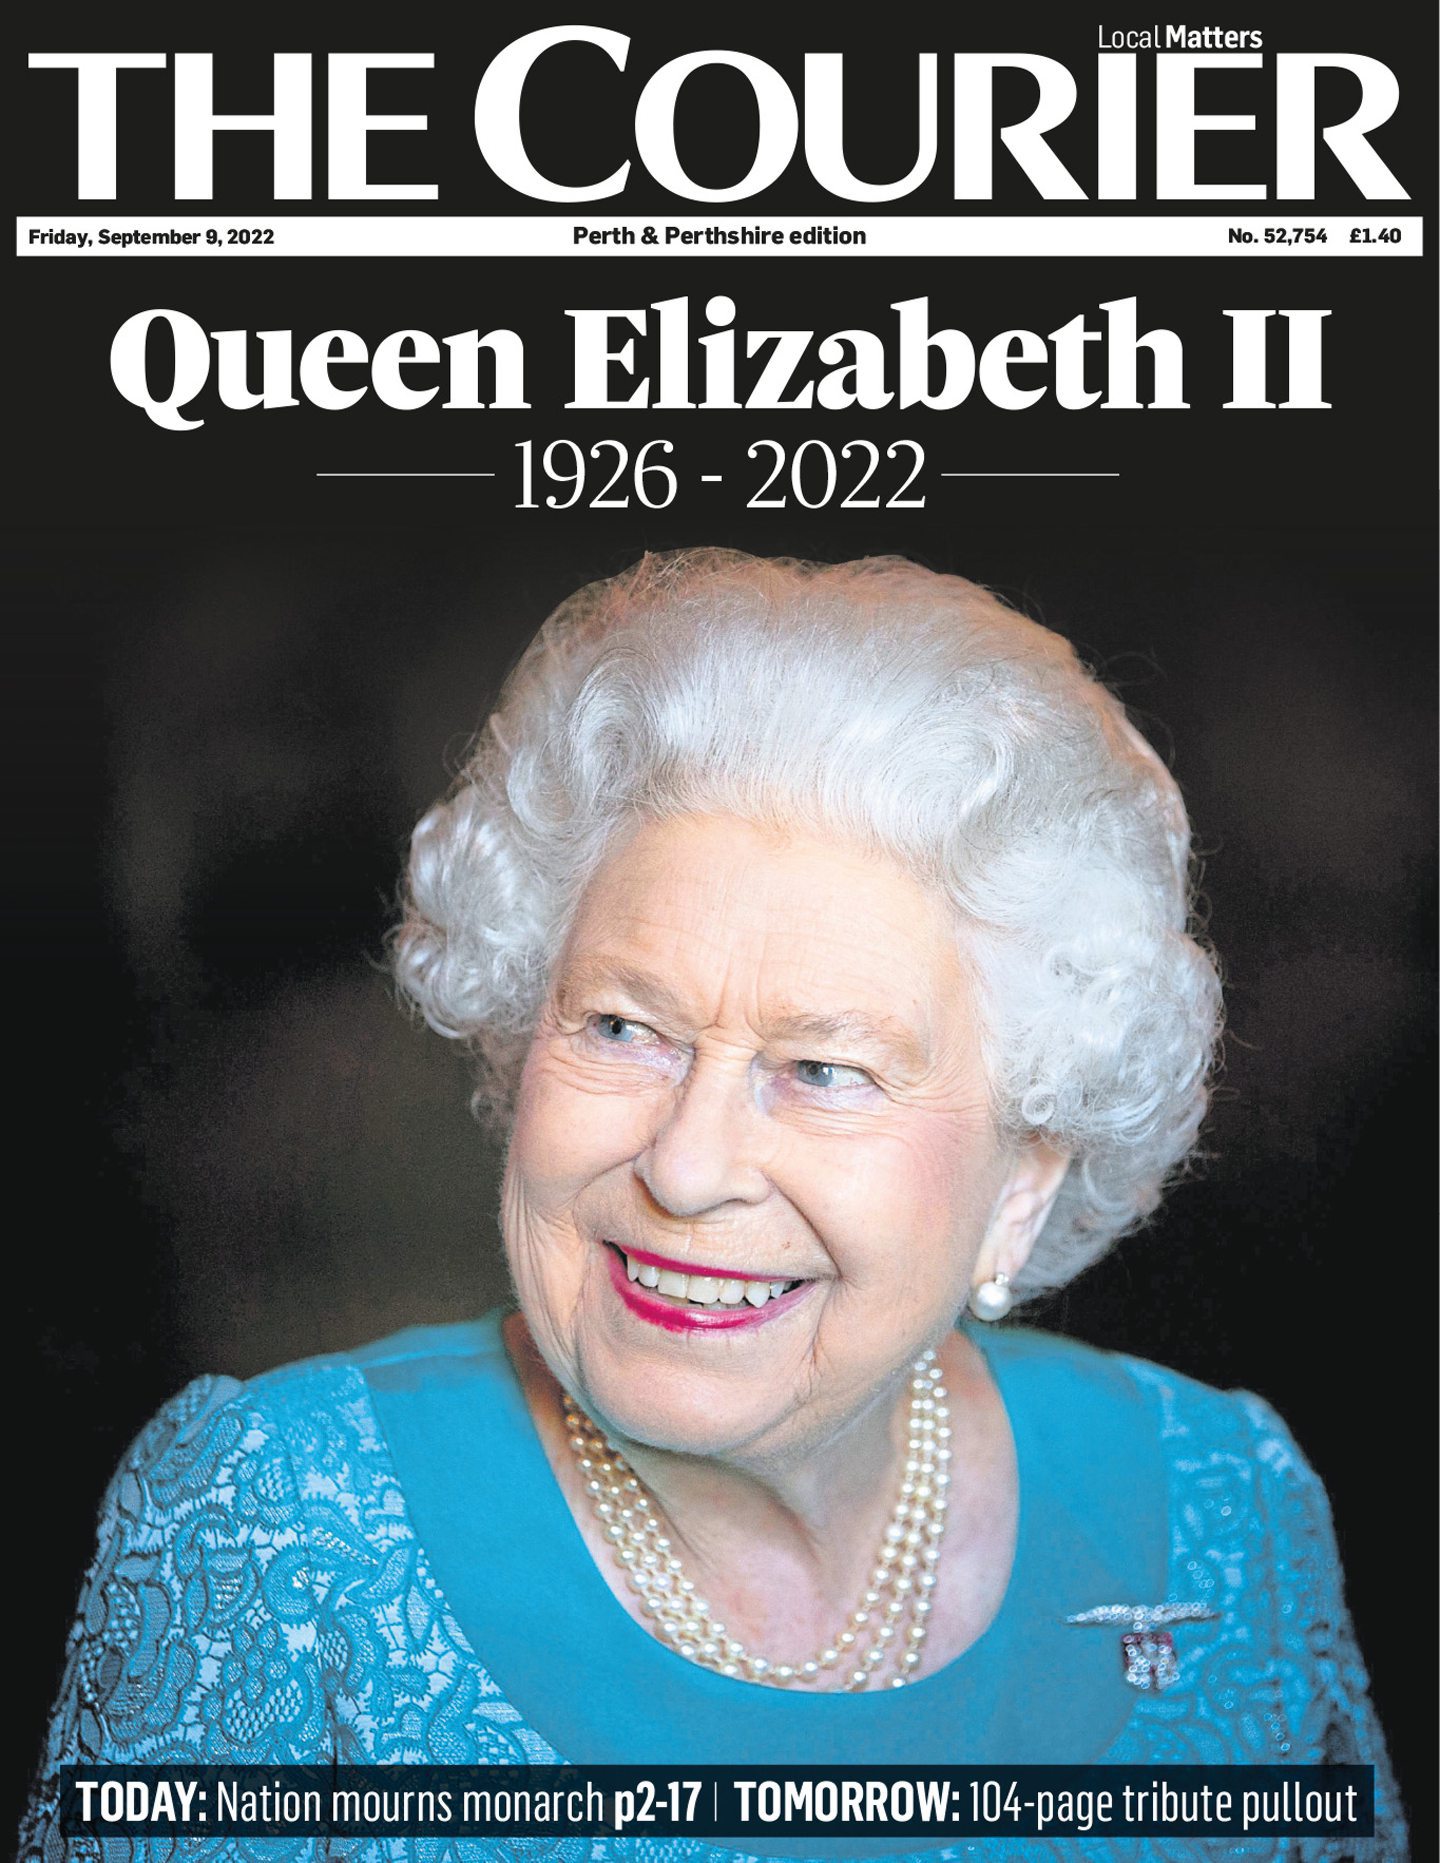 The Courier front page showed a smiling image with a dark background on September 9 2022. Image: DC Thomson.